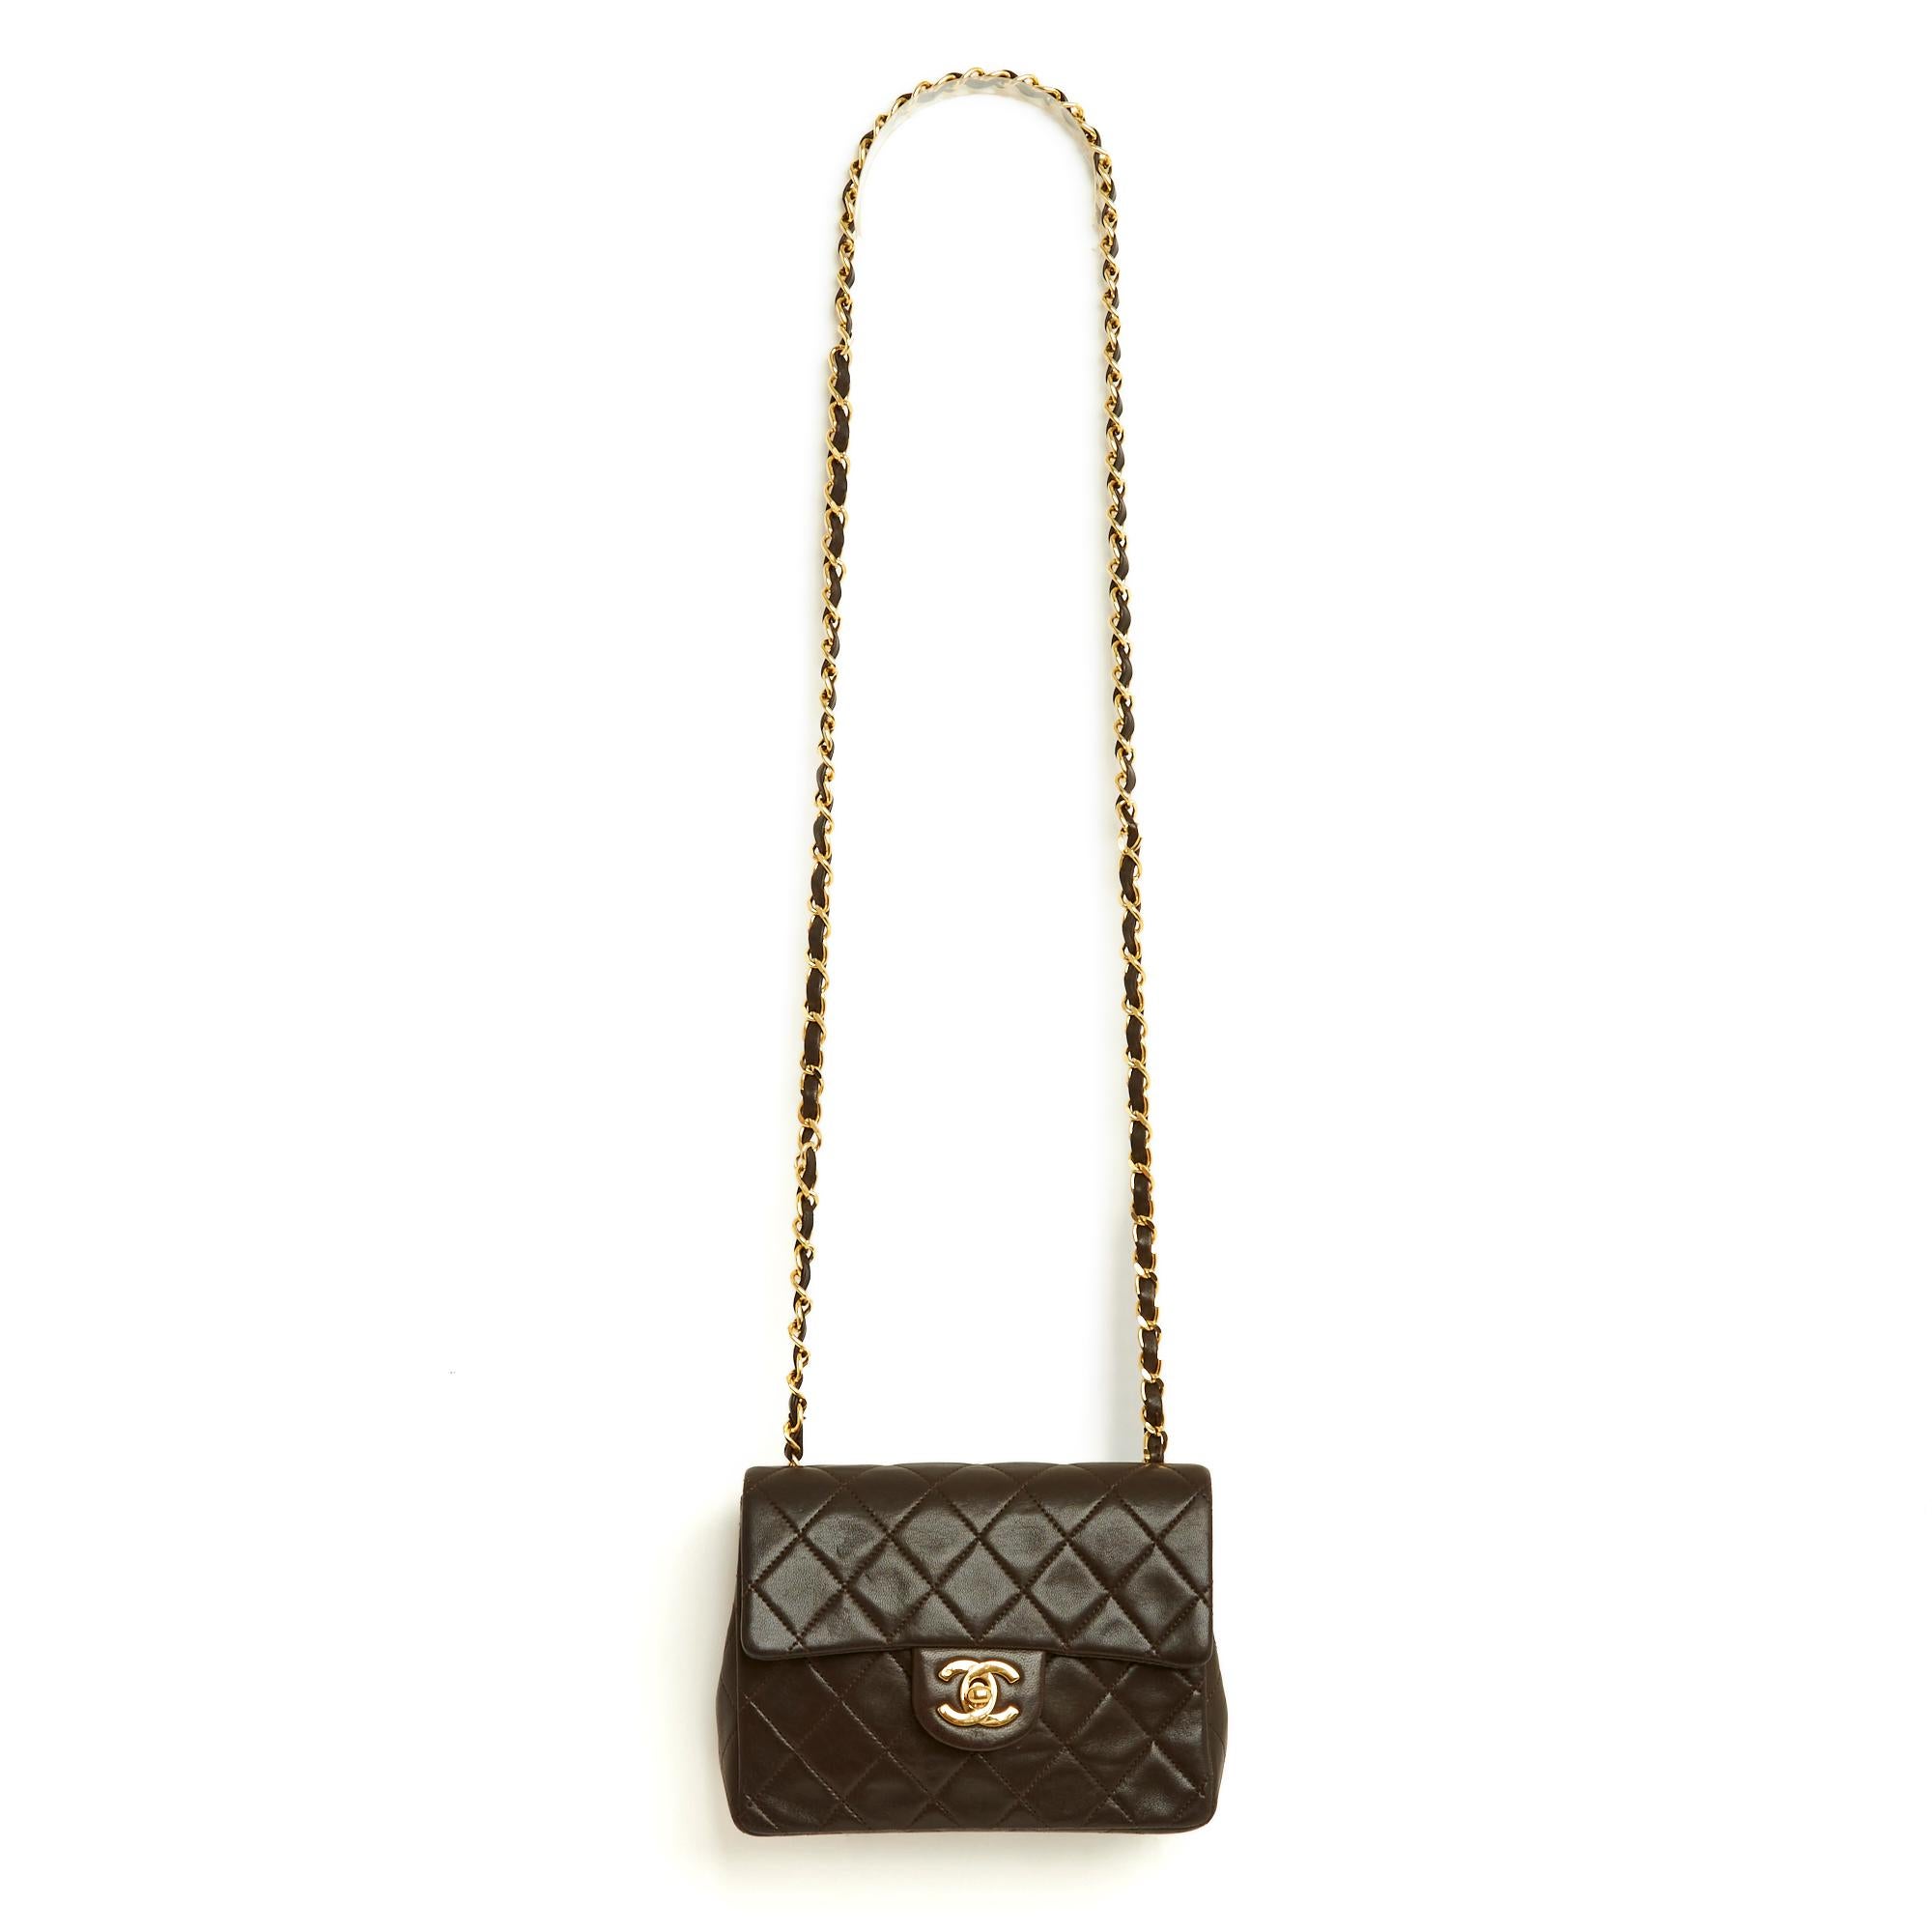 Chanel Classic Mini Carré model handbag in dark brown quilted leather, quarter-turn CC clasp in gold metal, matching leather interior with 1 zipped pocket and a patch pocket, long strap in metal chain interlaced with leather for shoulder or